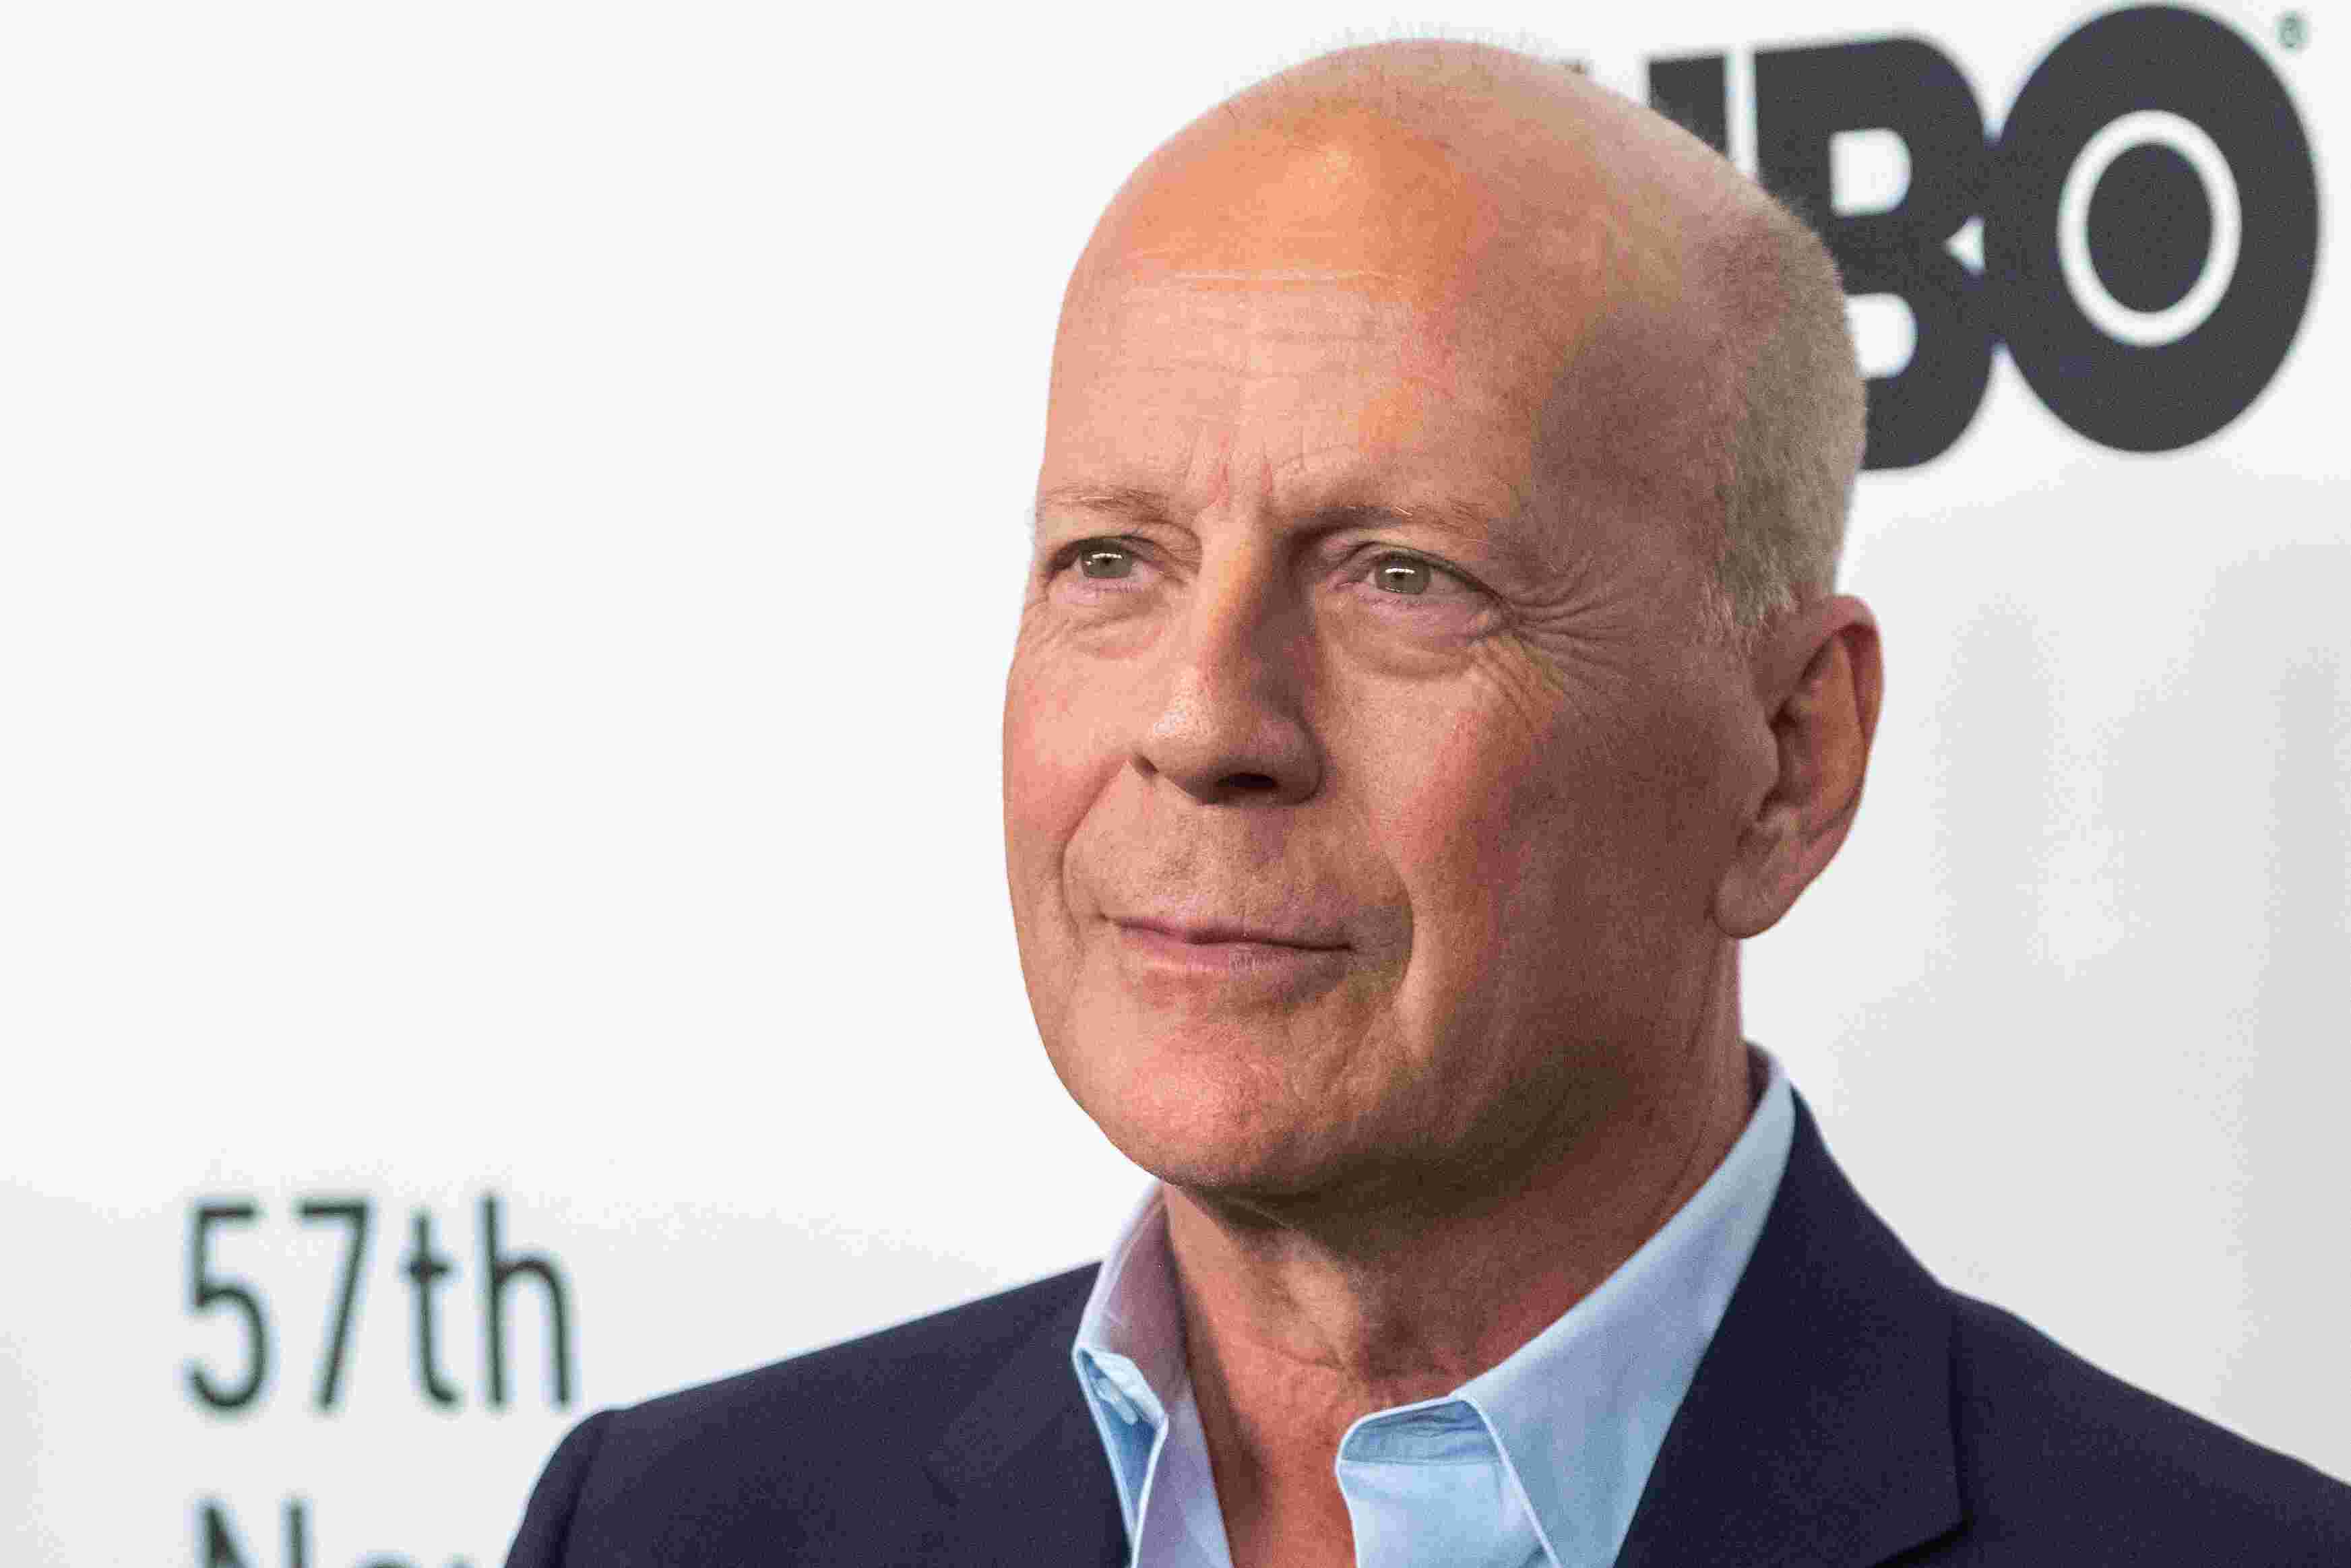 Razzies rescind Bruce Willis worst performance award after aphasia diagnosis